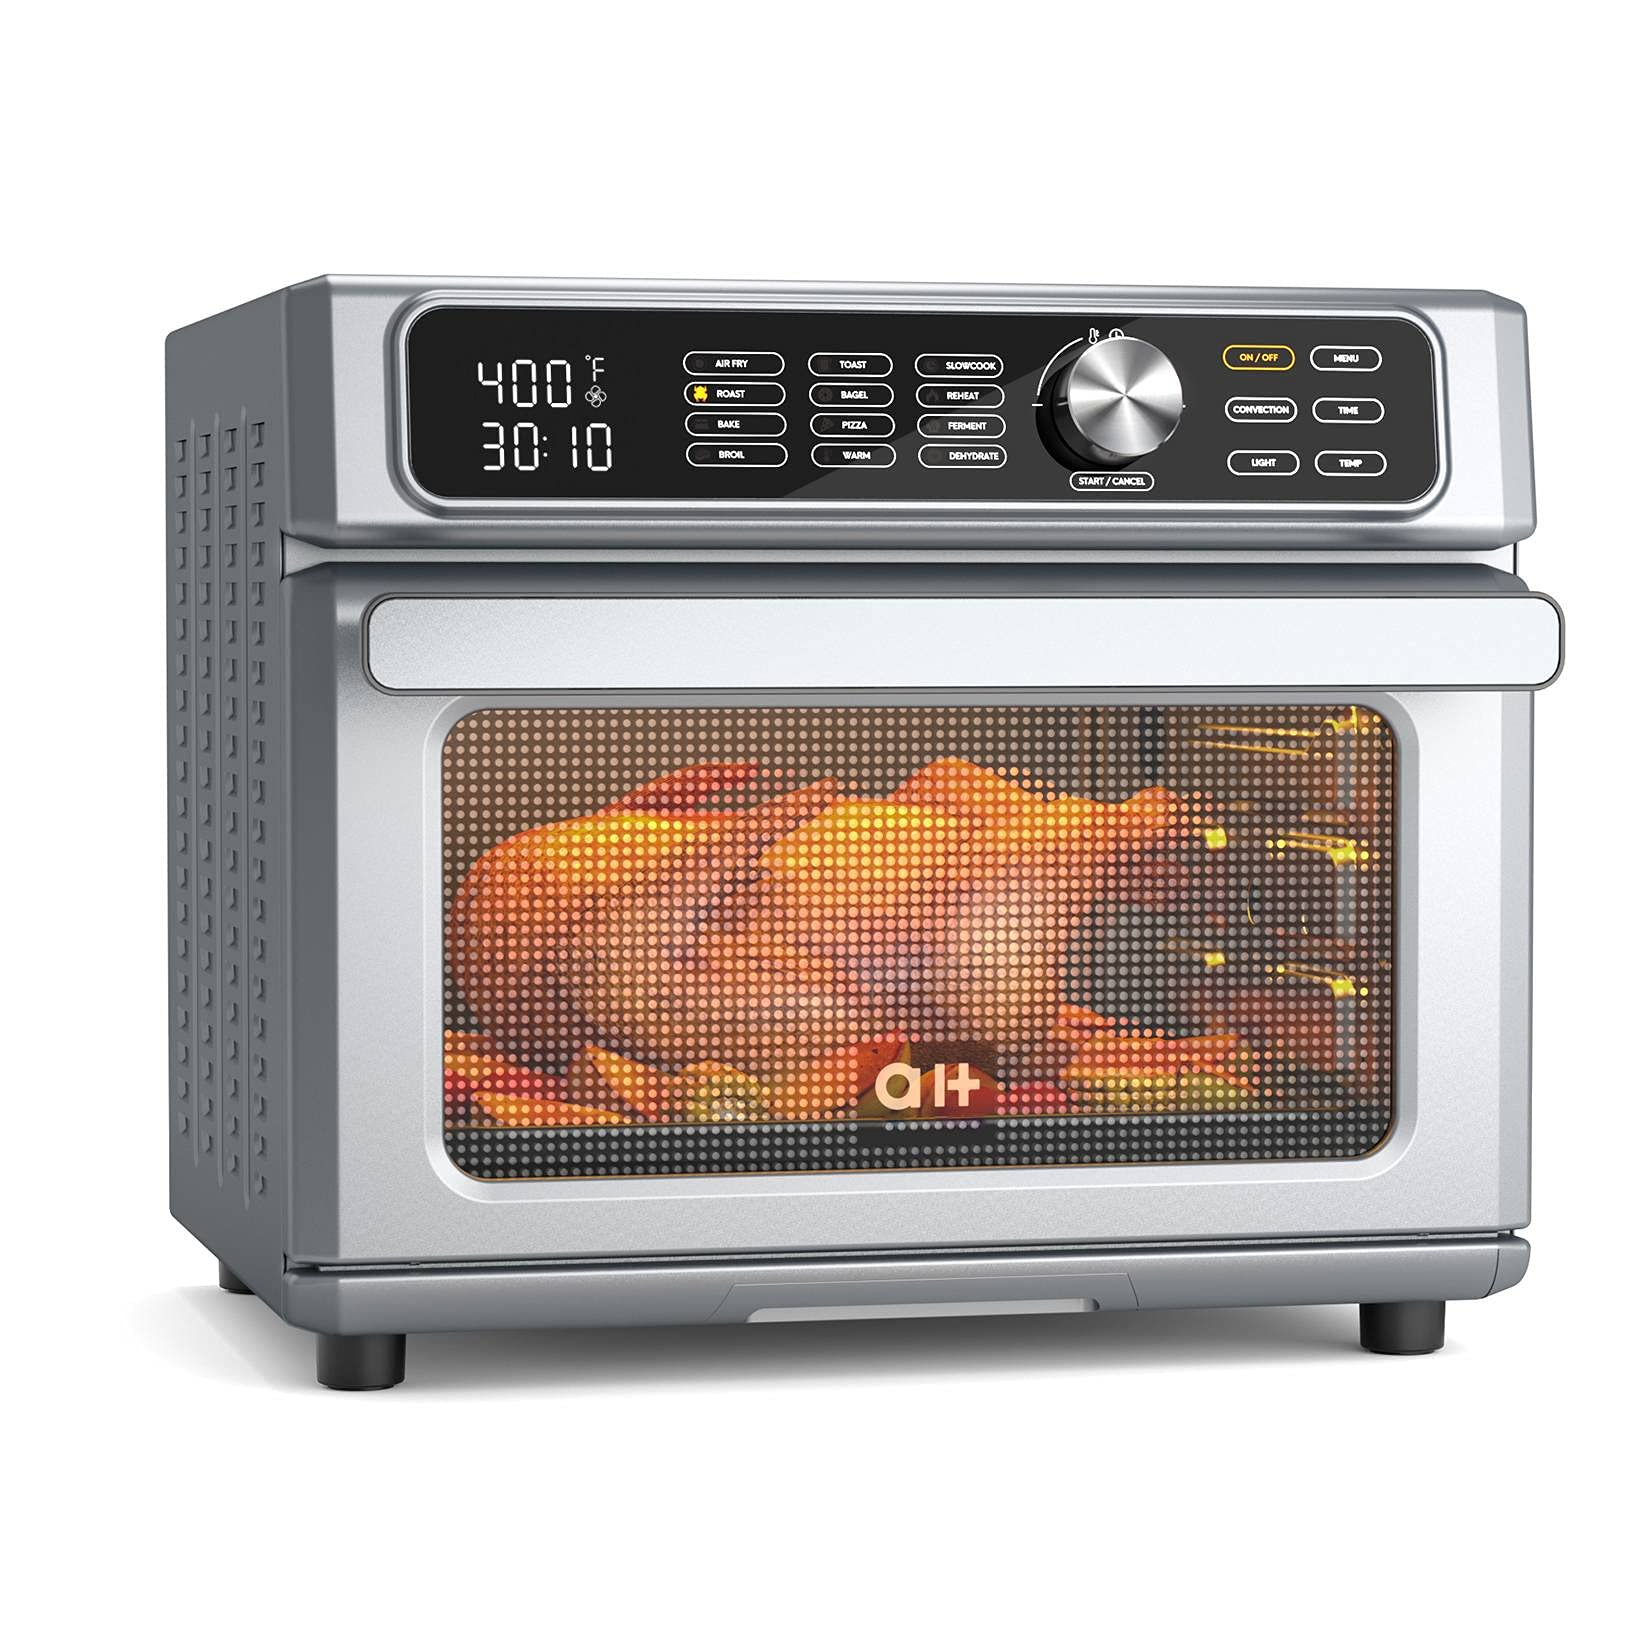 Load image into Gallery viewer, Toaster Oven 12-in-1 Air Fryer Combo, Digital Convection Oven And Dehydrator for Chicken,Pizza and Cookies, Large 24 QT Countertop Oven with 100 Online Recipes, Stainless Steel, 1700W
